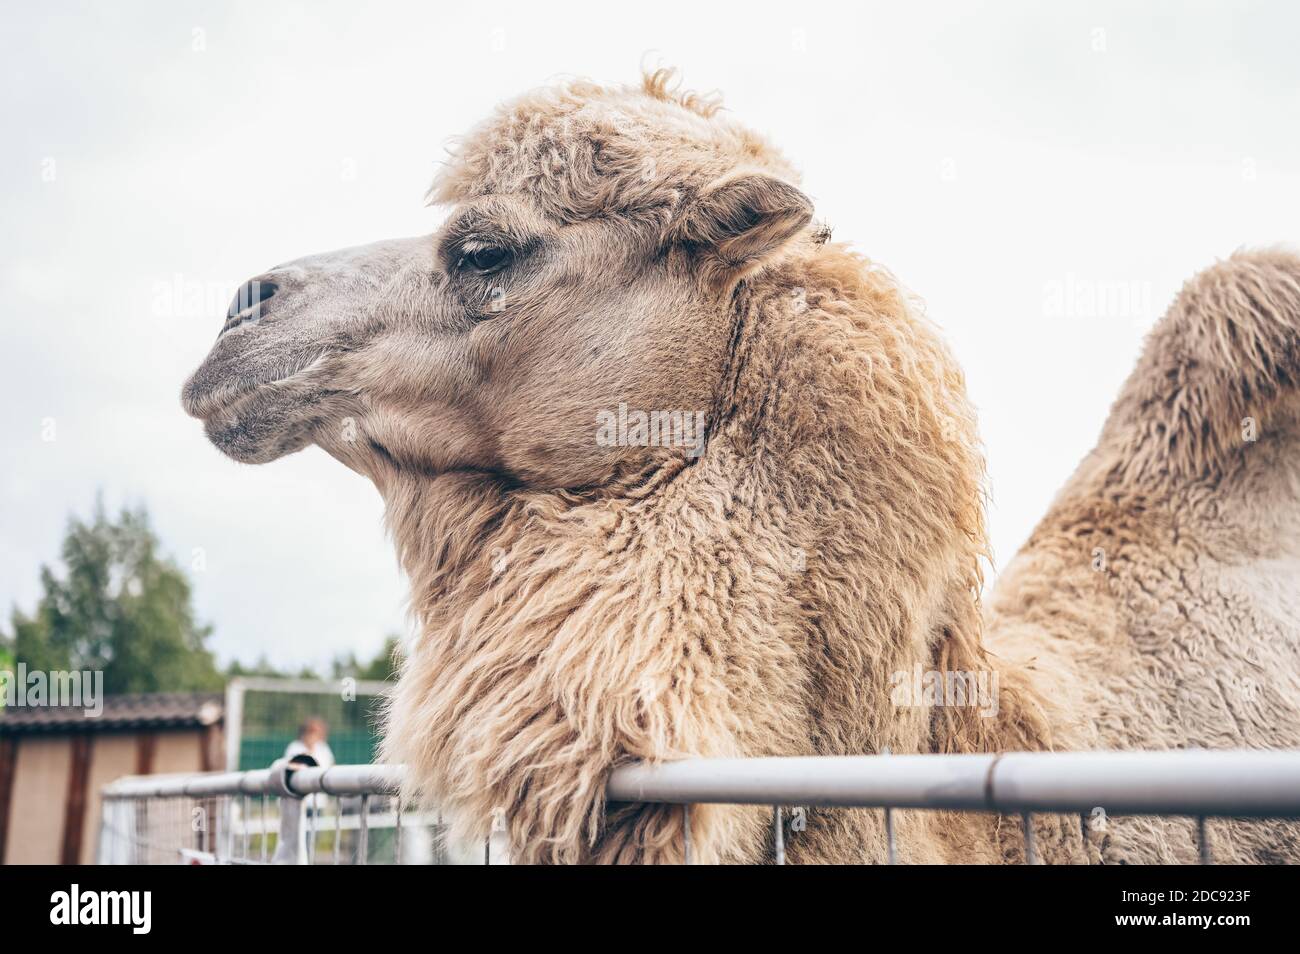 Close up of funny Bactrian camel in Karelia zoo. Hairy camel in a pen with  long light brown fur winter coat to keep them warm with two humps in  captivity for entertainment